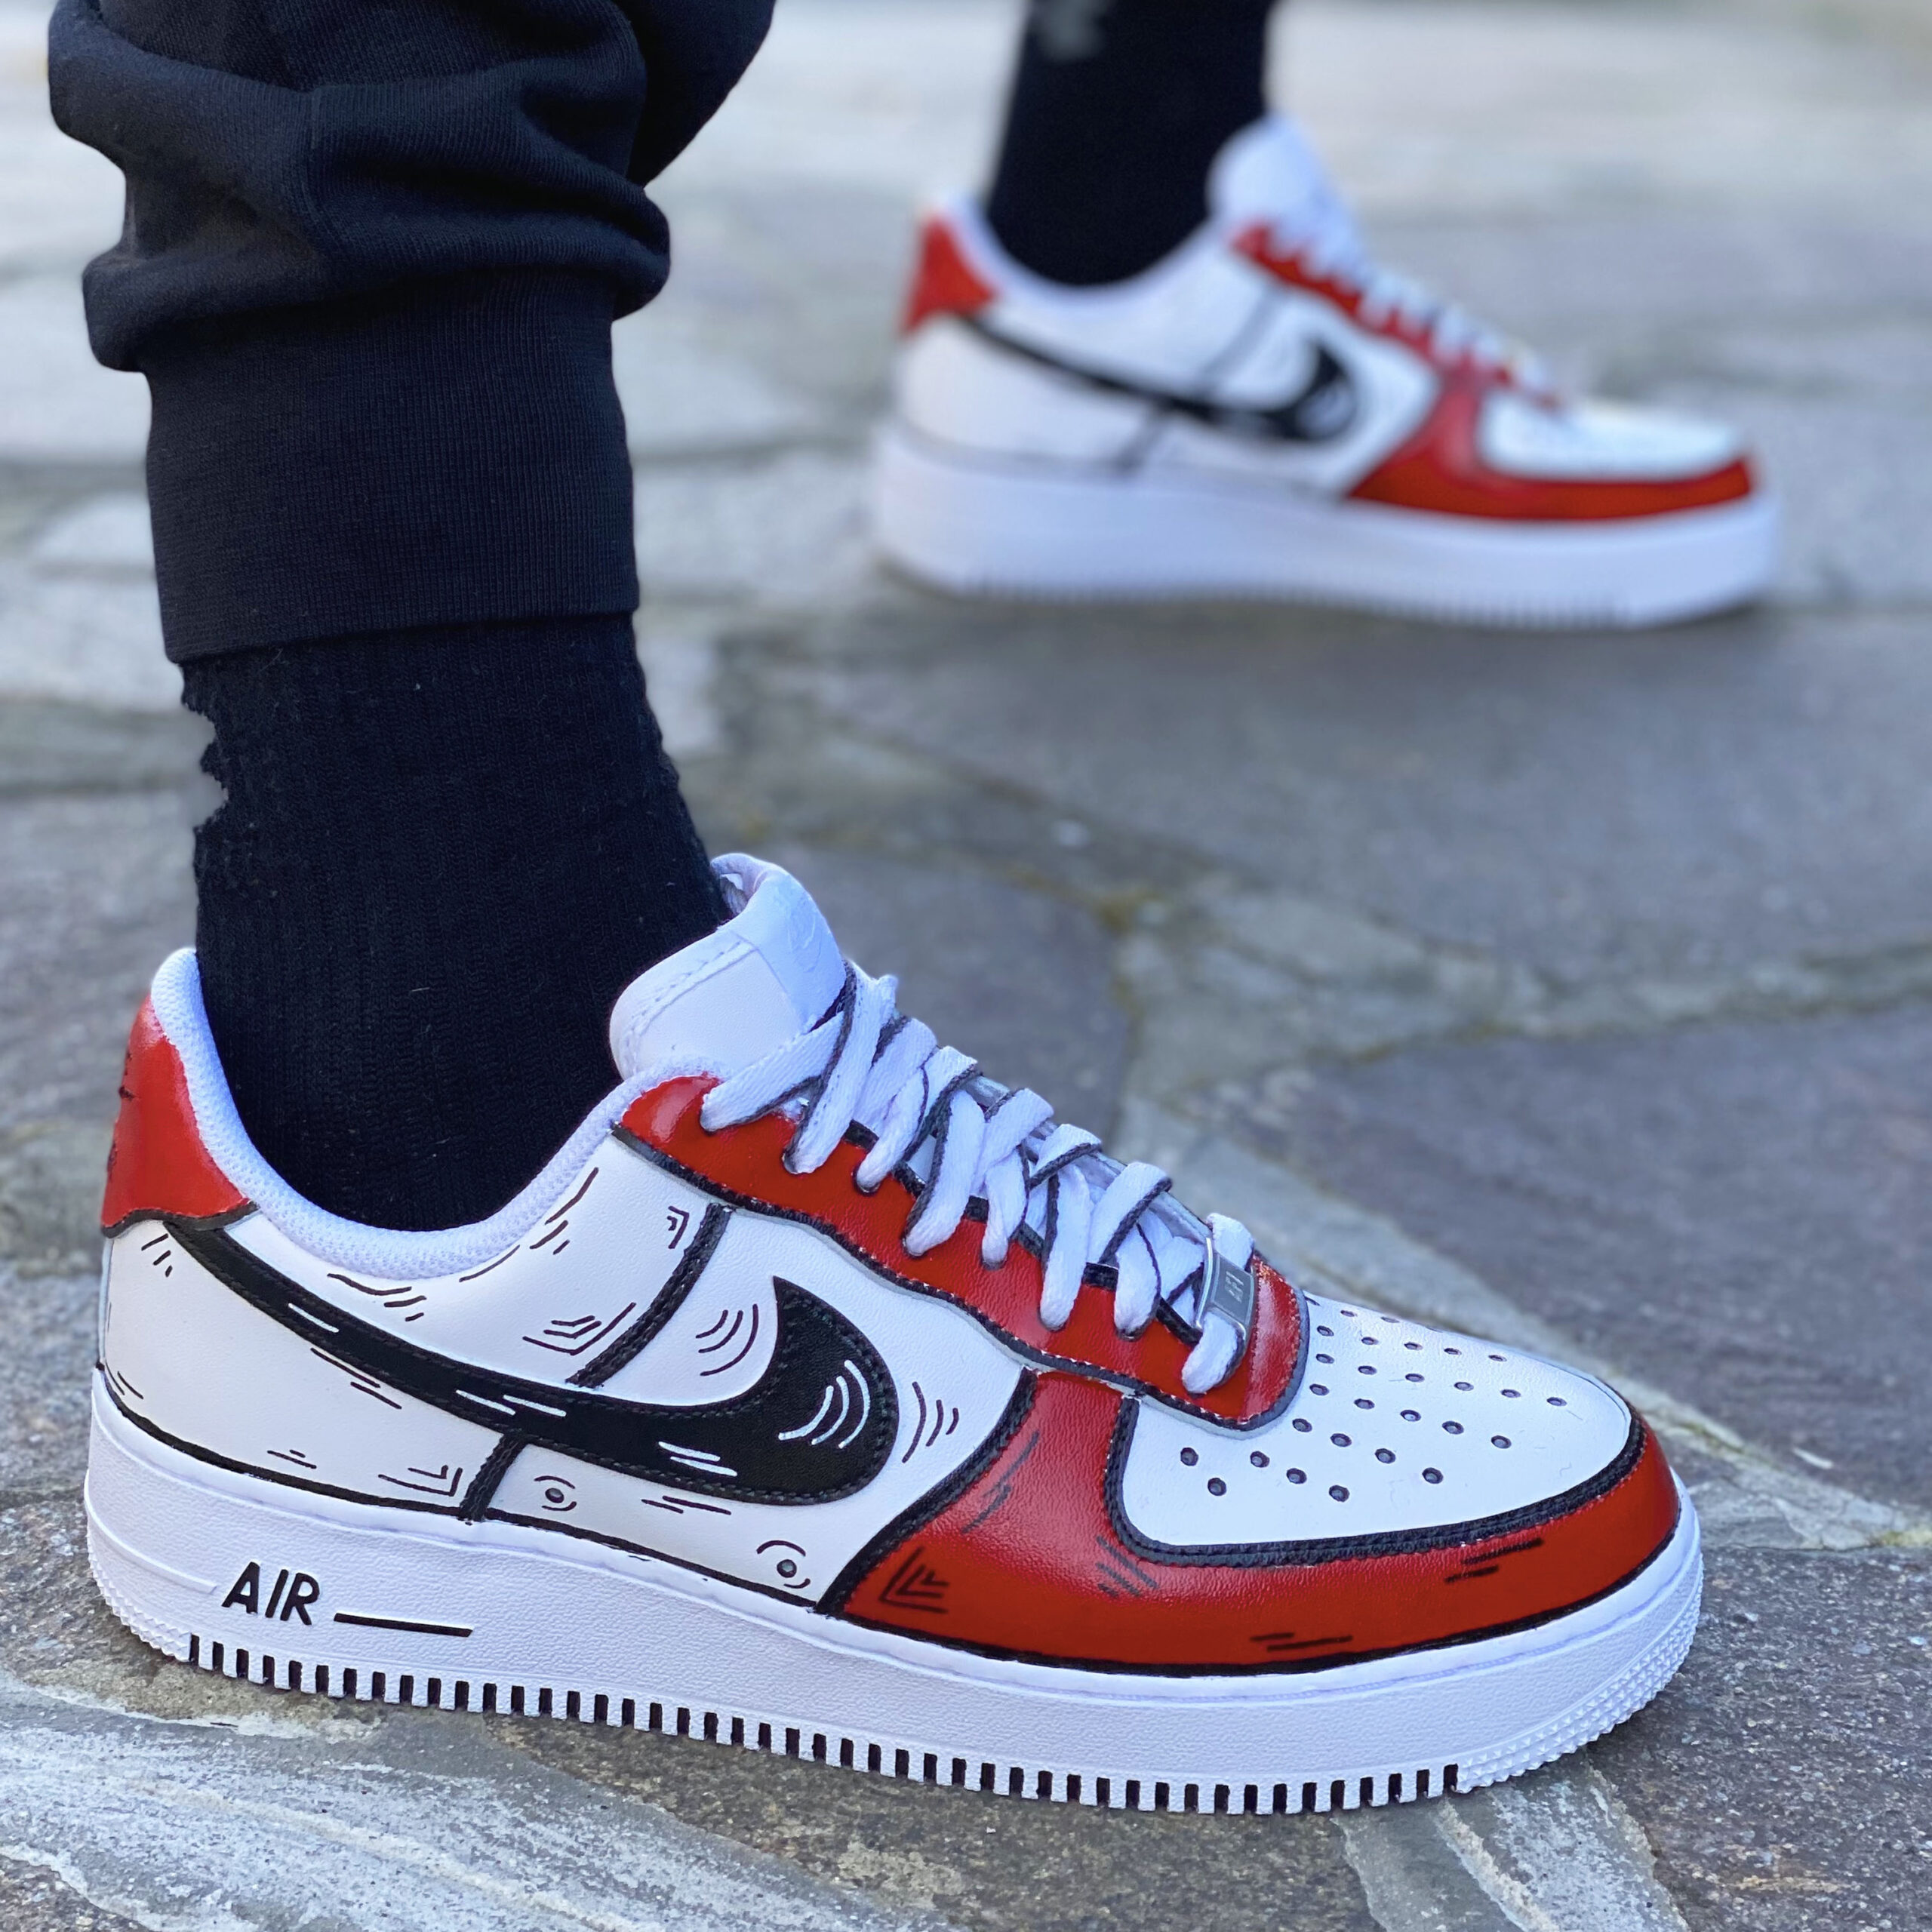 air force 1 nere e rosse uomo